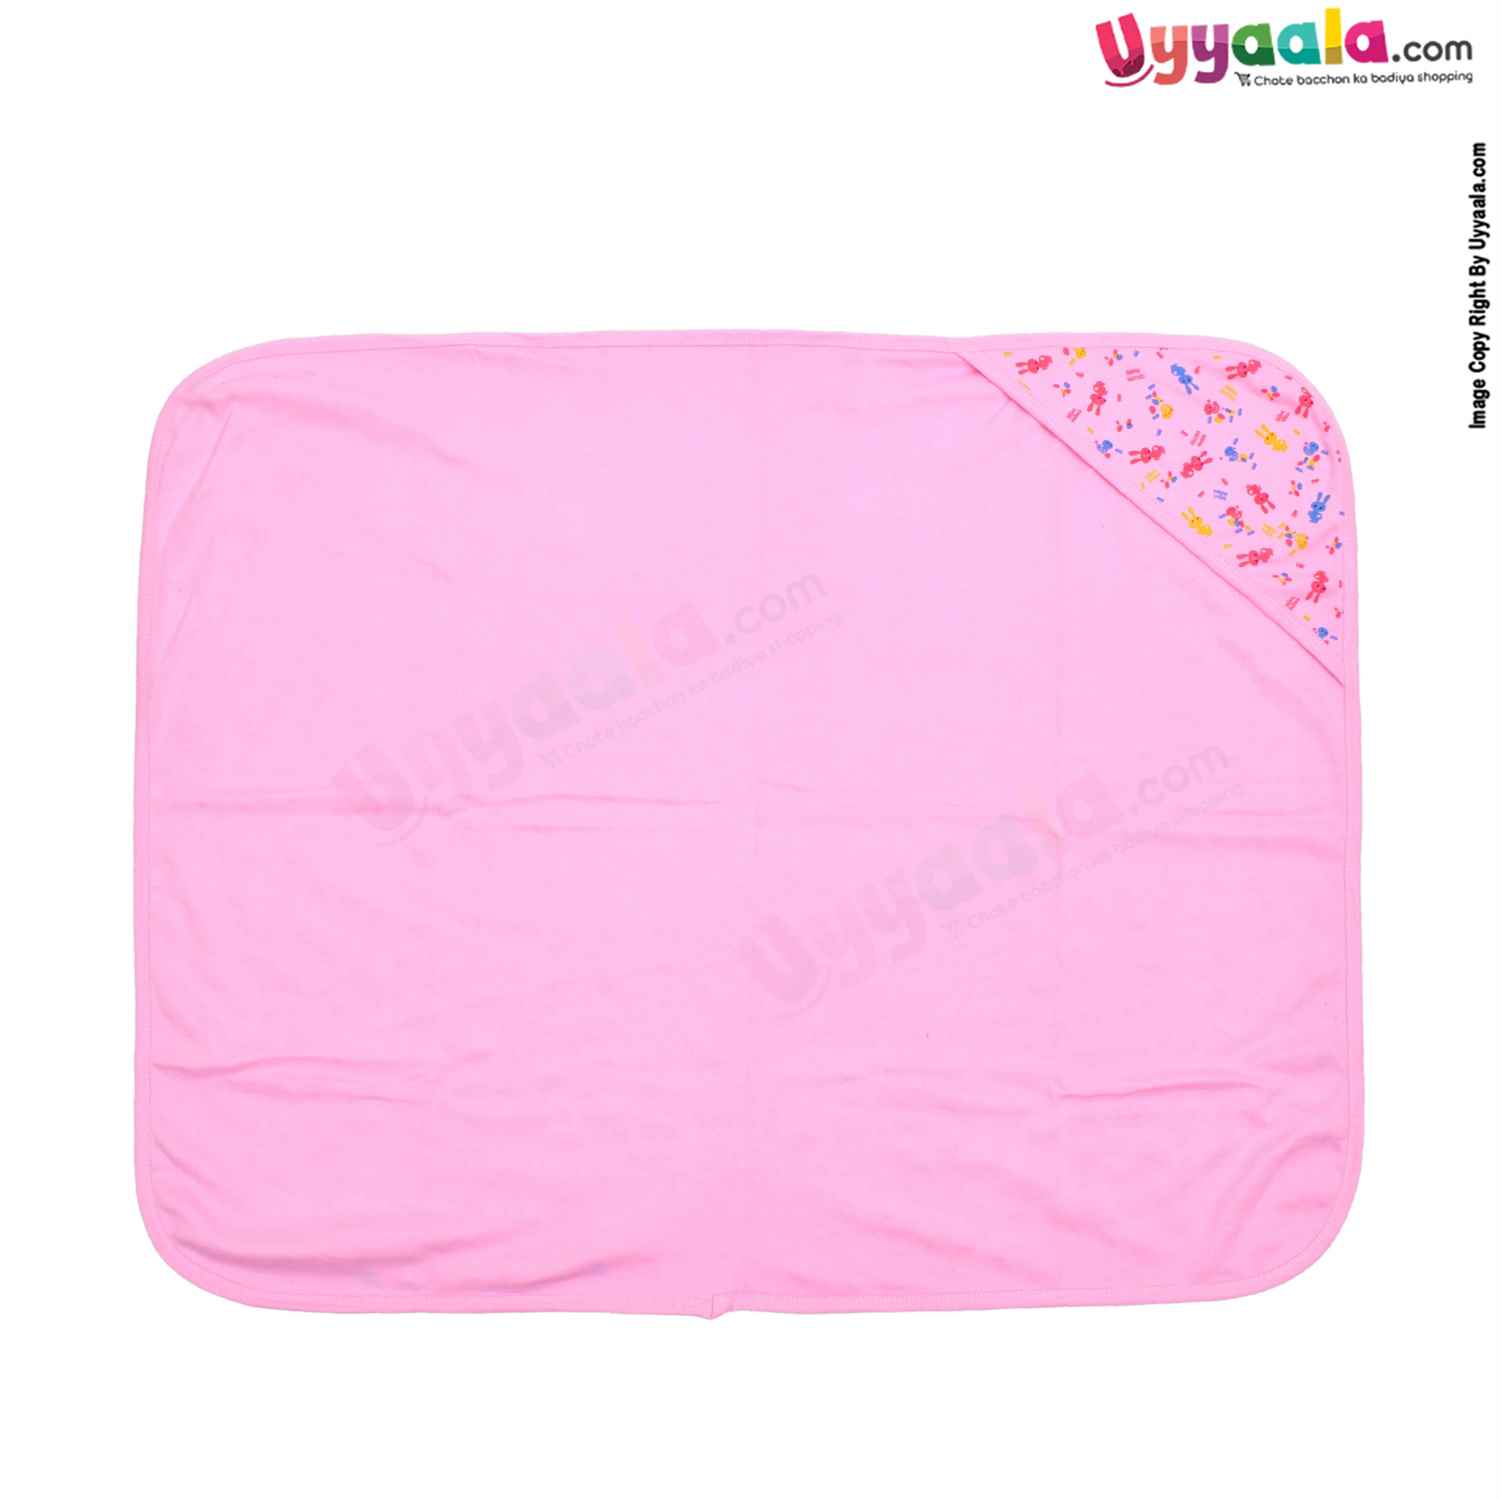 Hosiery Cotton Hooded Towel for Babies with Animal Print 0-12m Age, Size (86*72cm)- Pink